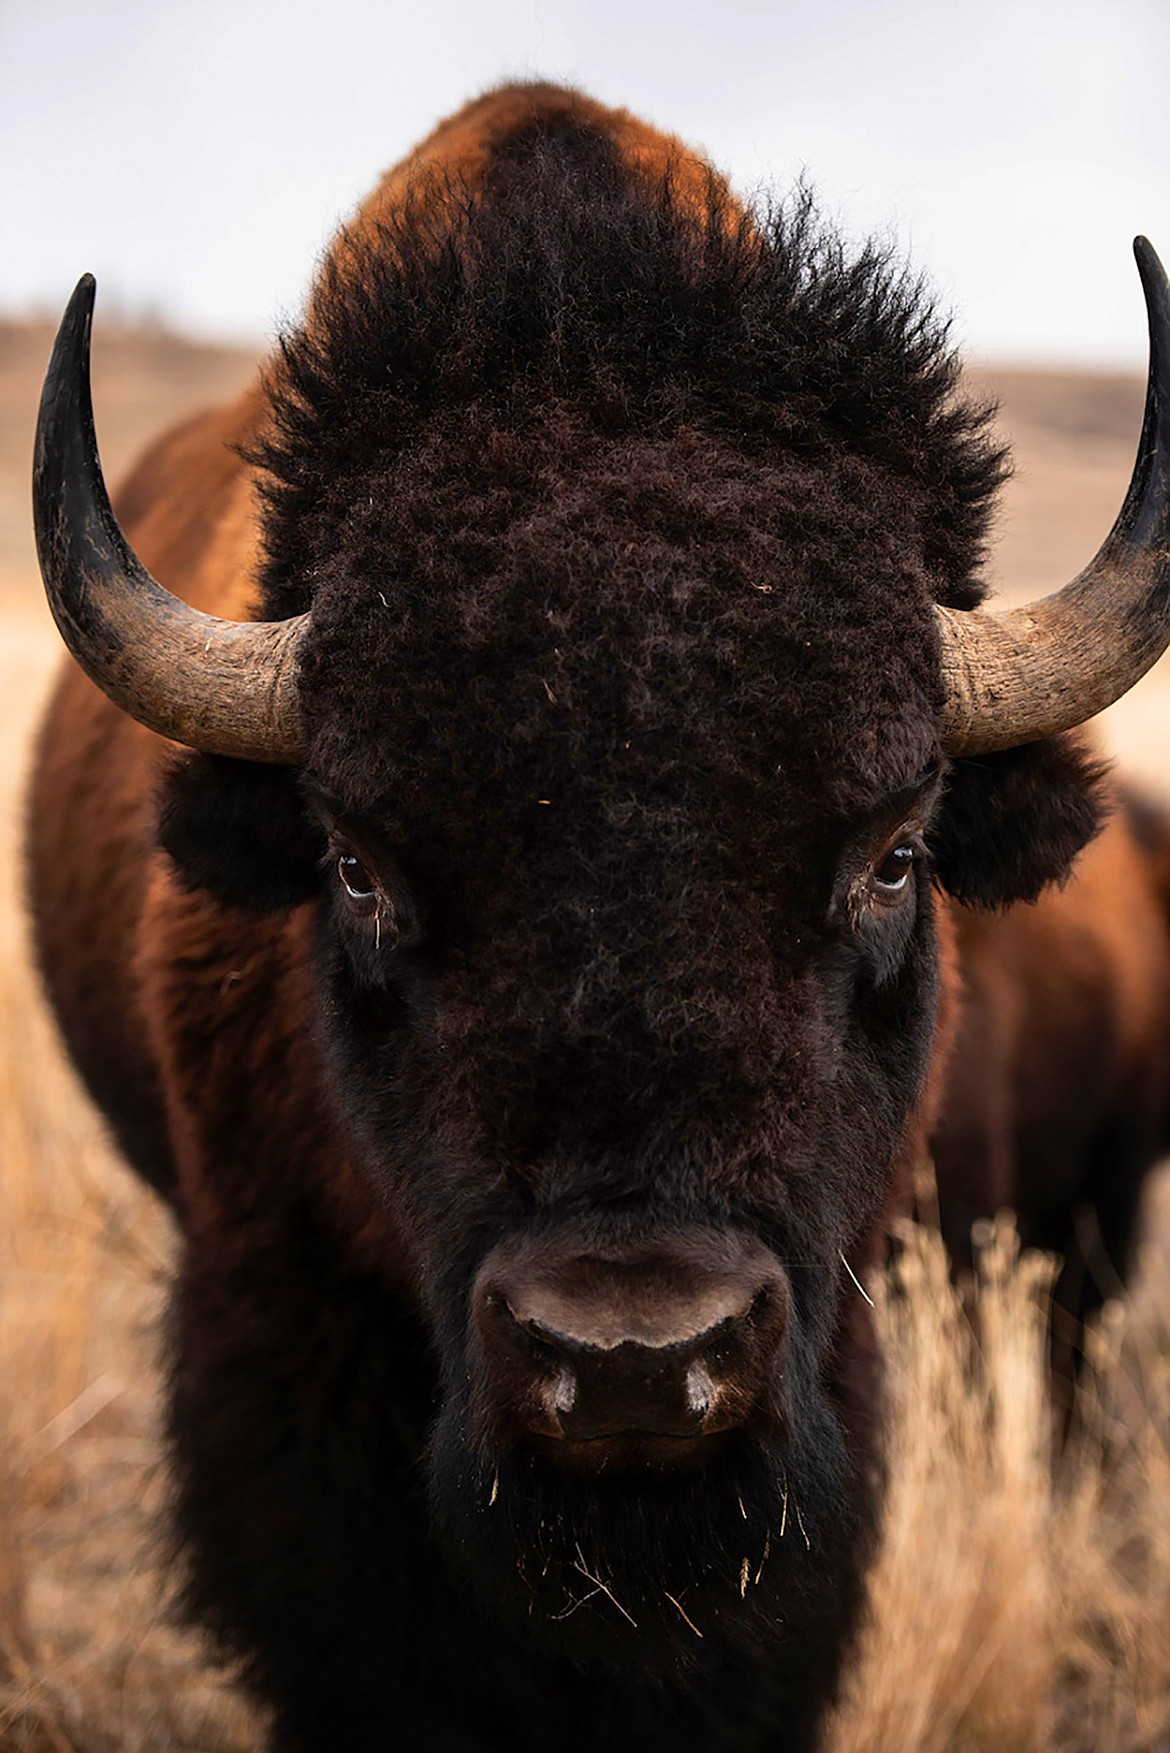 The Roam Free Ranch started with eight bison in 2014, but now has a herd of 150. (photo provided)